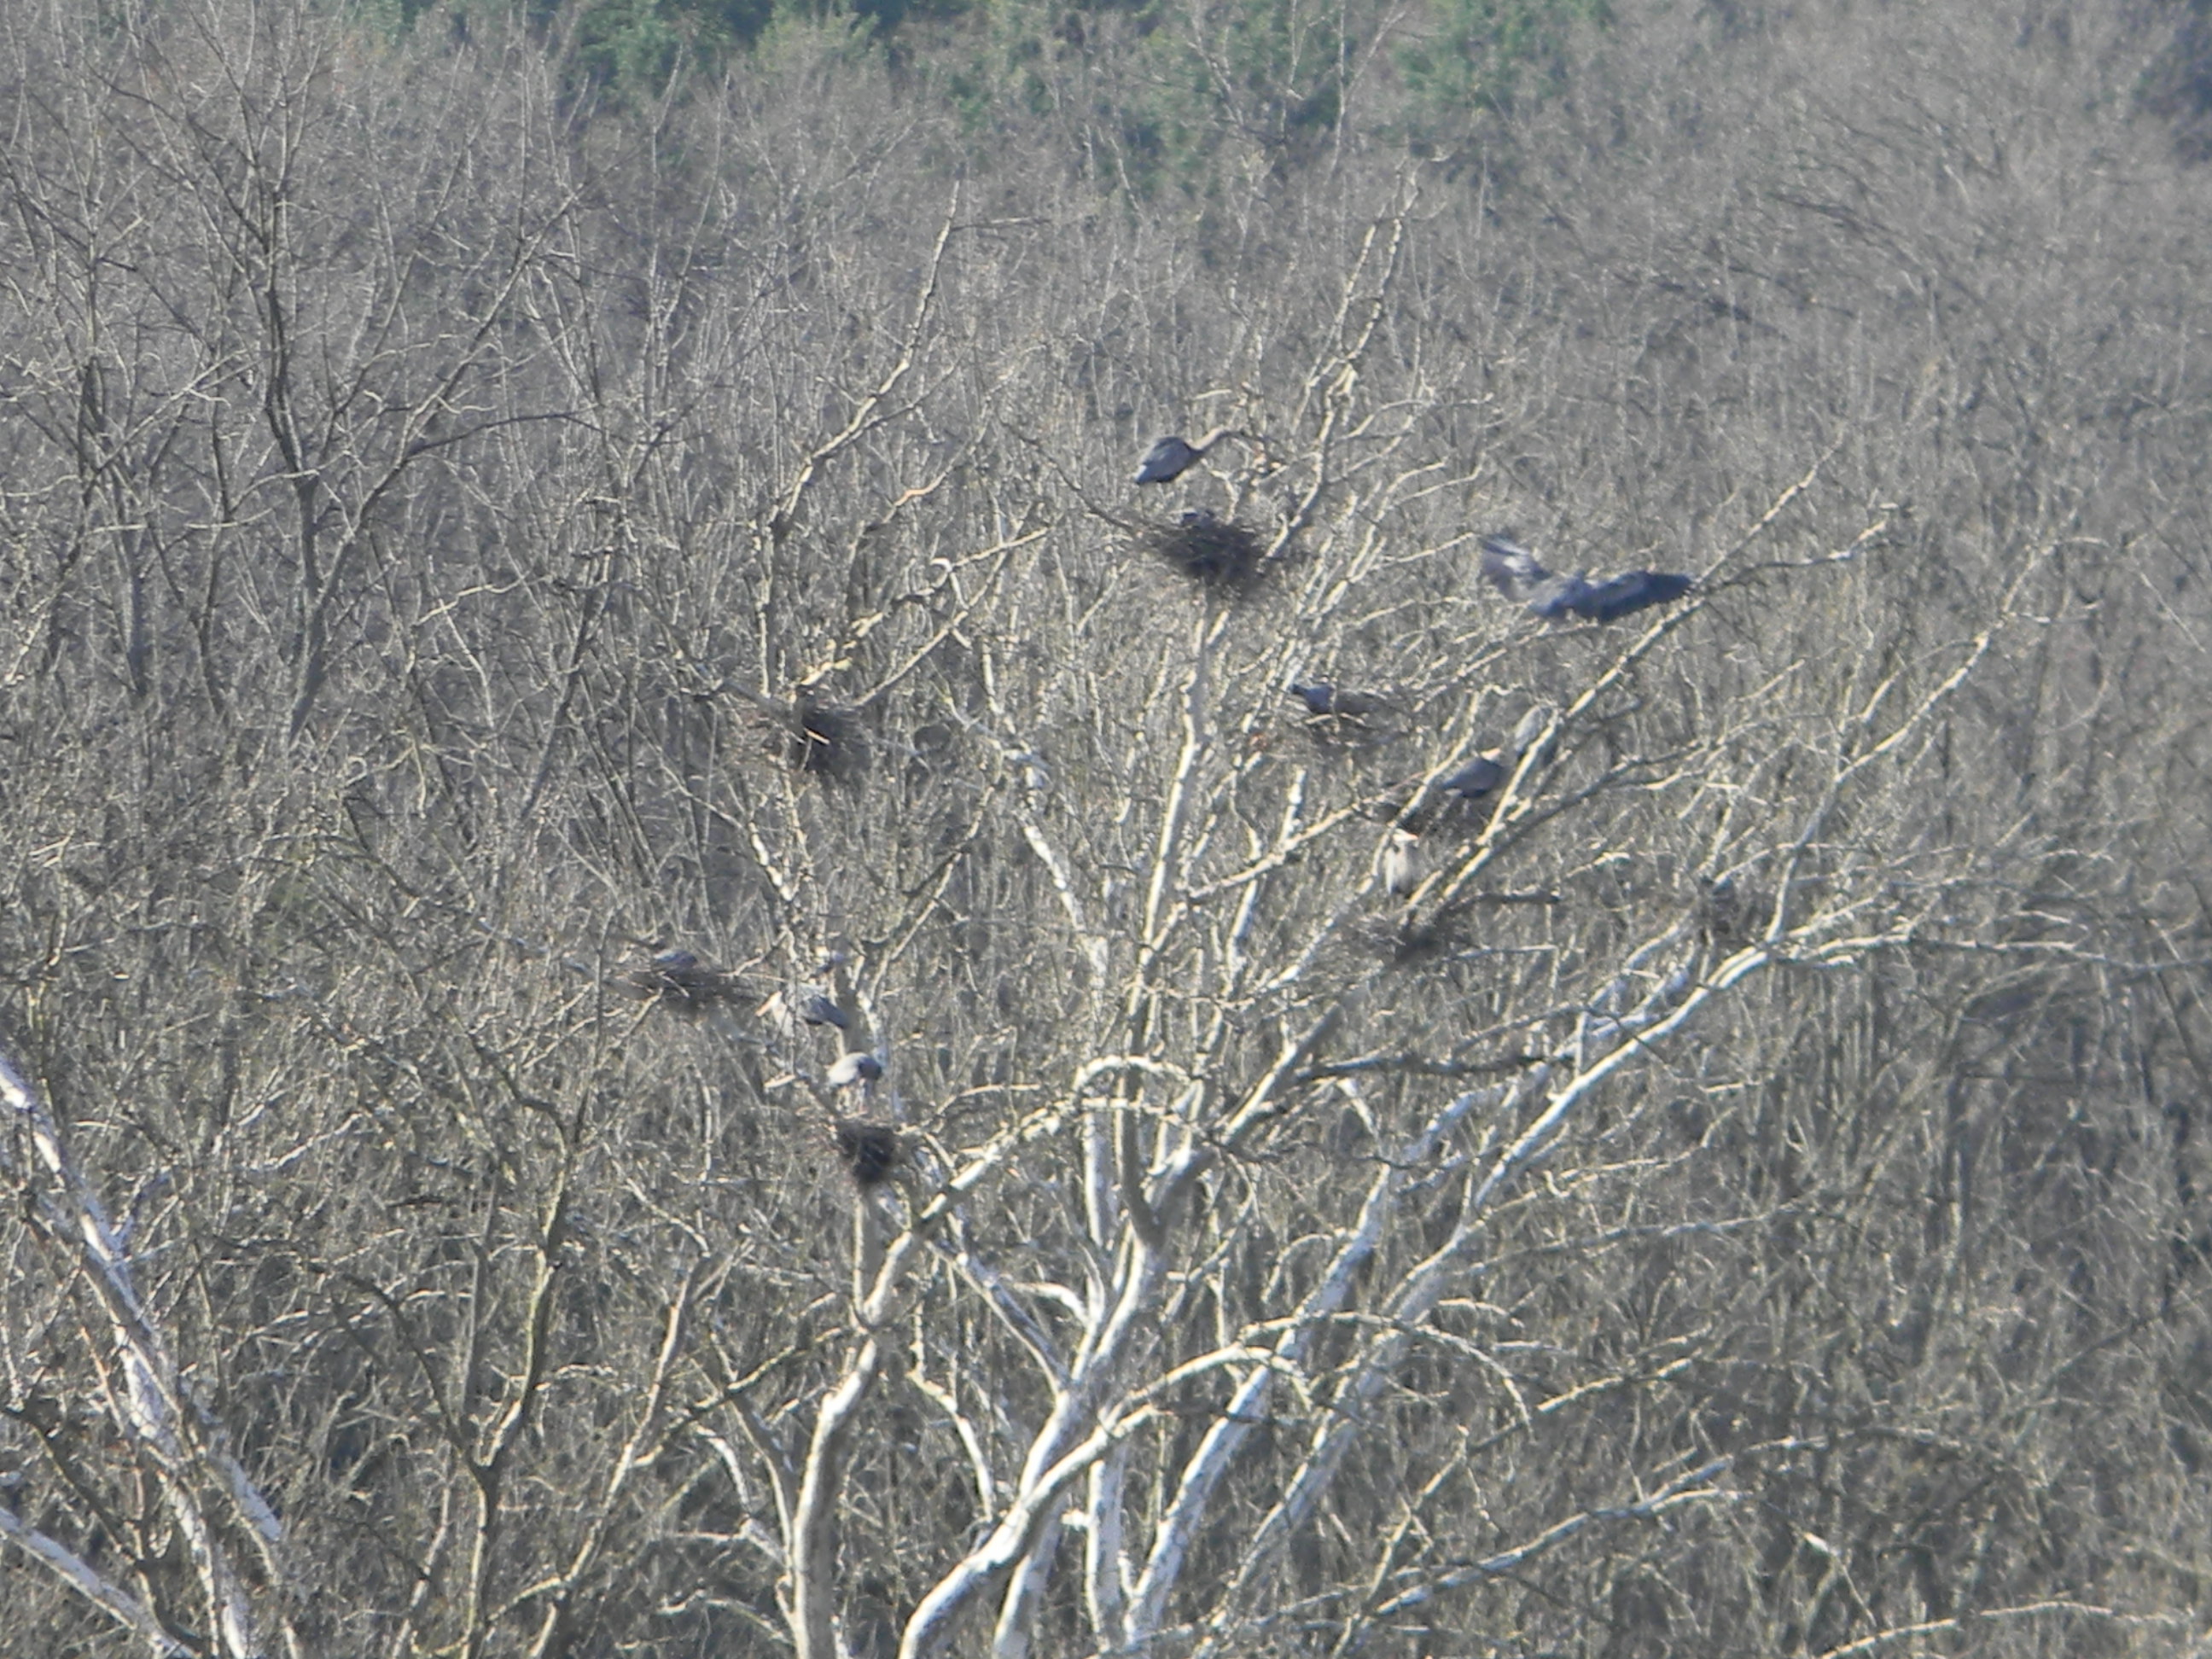 Rookery on the Allegheny River, Foxburg, PA